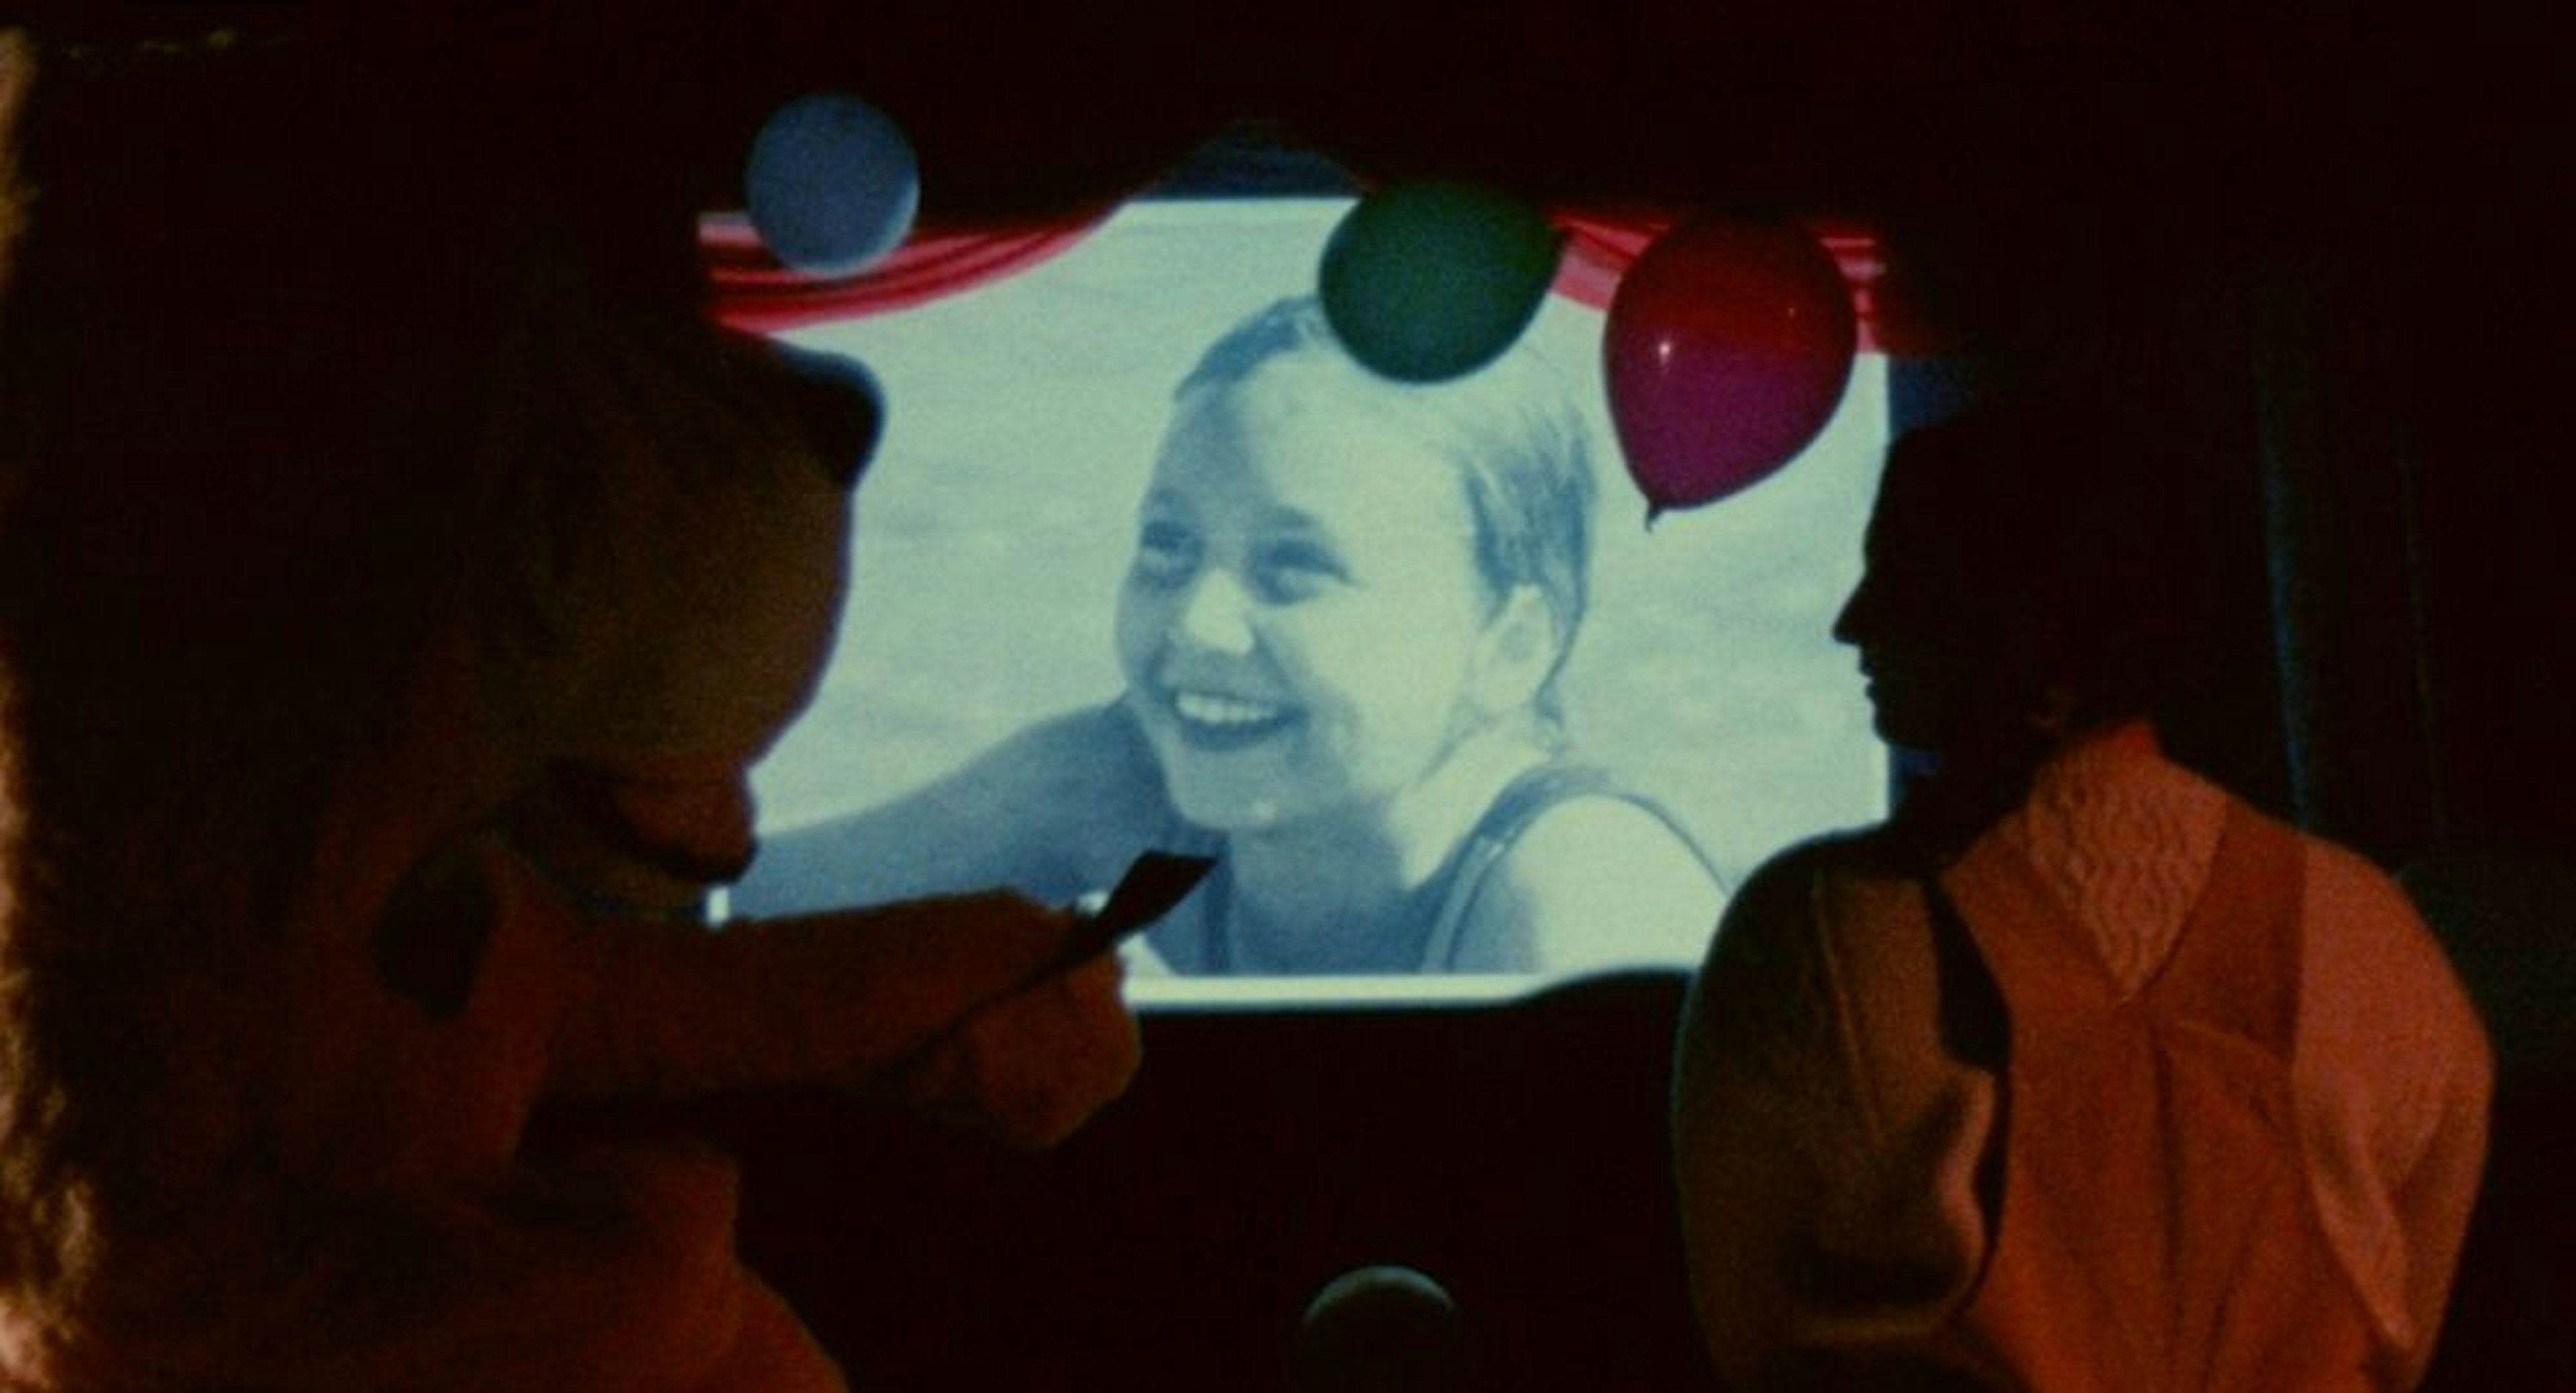 Films still showing a person and a teddy bear standing in front of a screen depicting a monochrome portrait of a child smiling, surrounded with balloons 